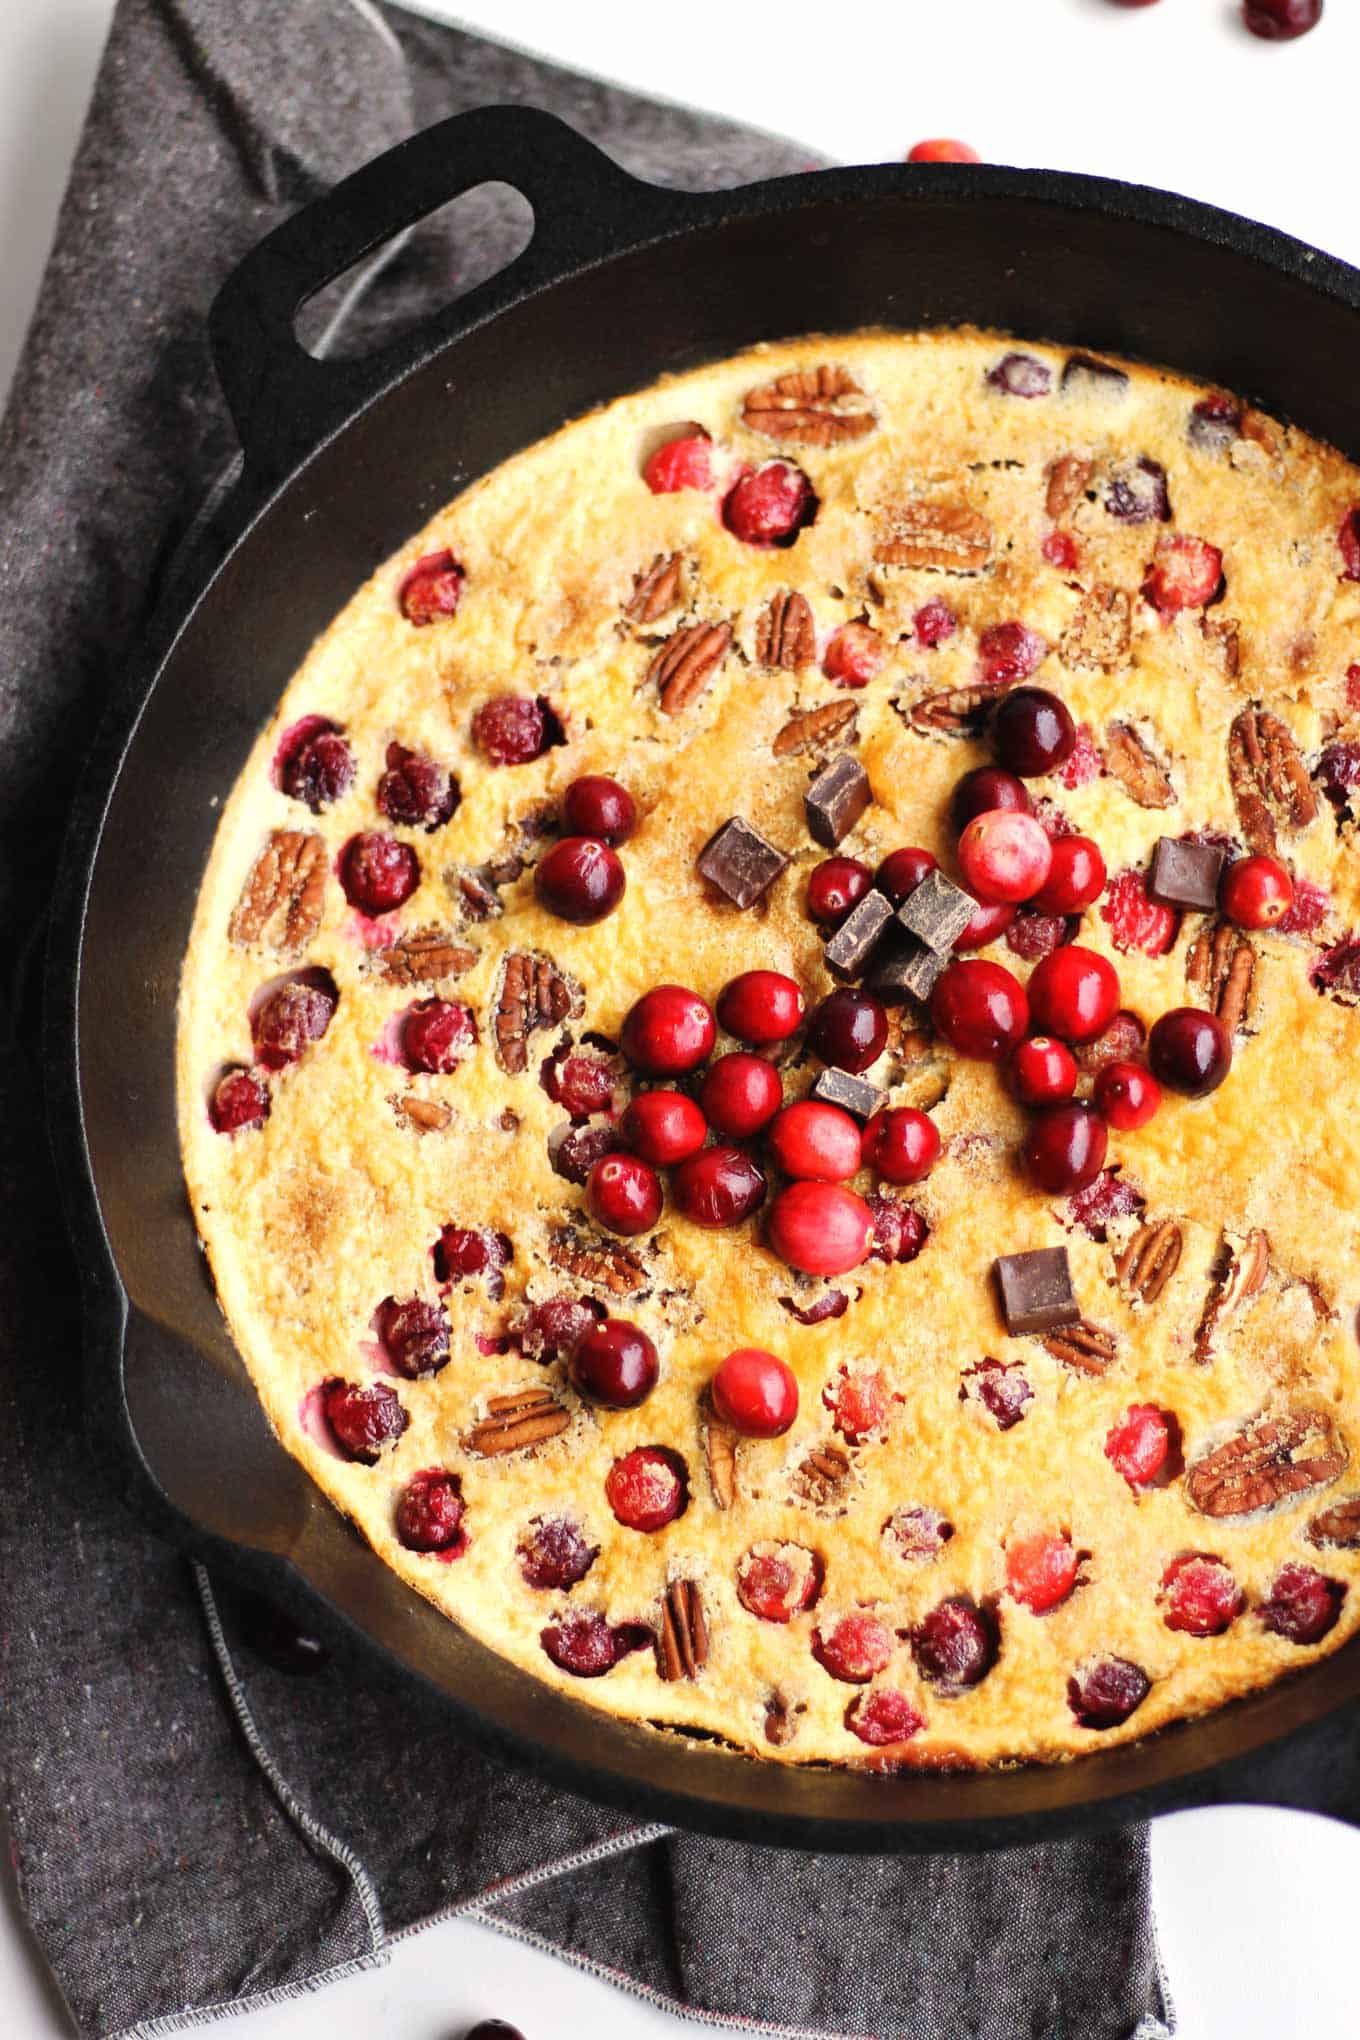 Cranberry clafoutis with dark chocolate and pecans! Easy blender recipe for the classic French custardy breakfast, with a holiday spin. Eat dessert for breakfast! - Rhubarbarians